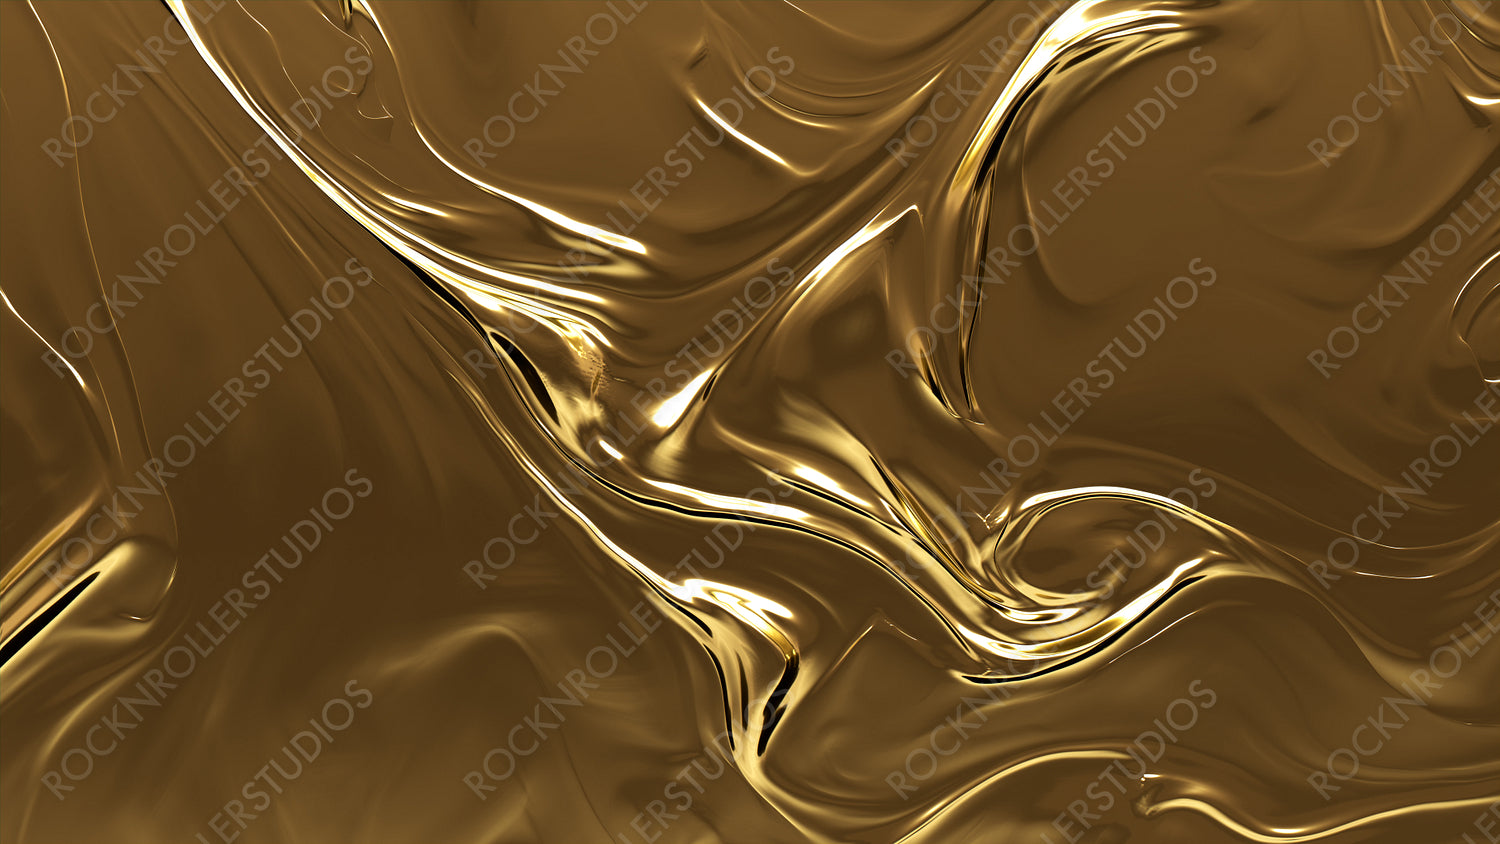 Metallic, Smooth, Luxurious texture. A Golden surface for Opulent, Gold Backgrounds.